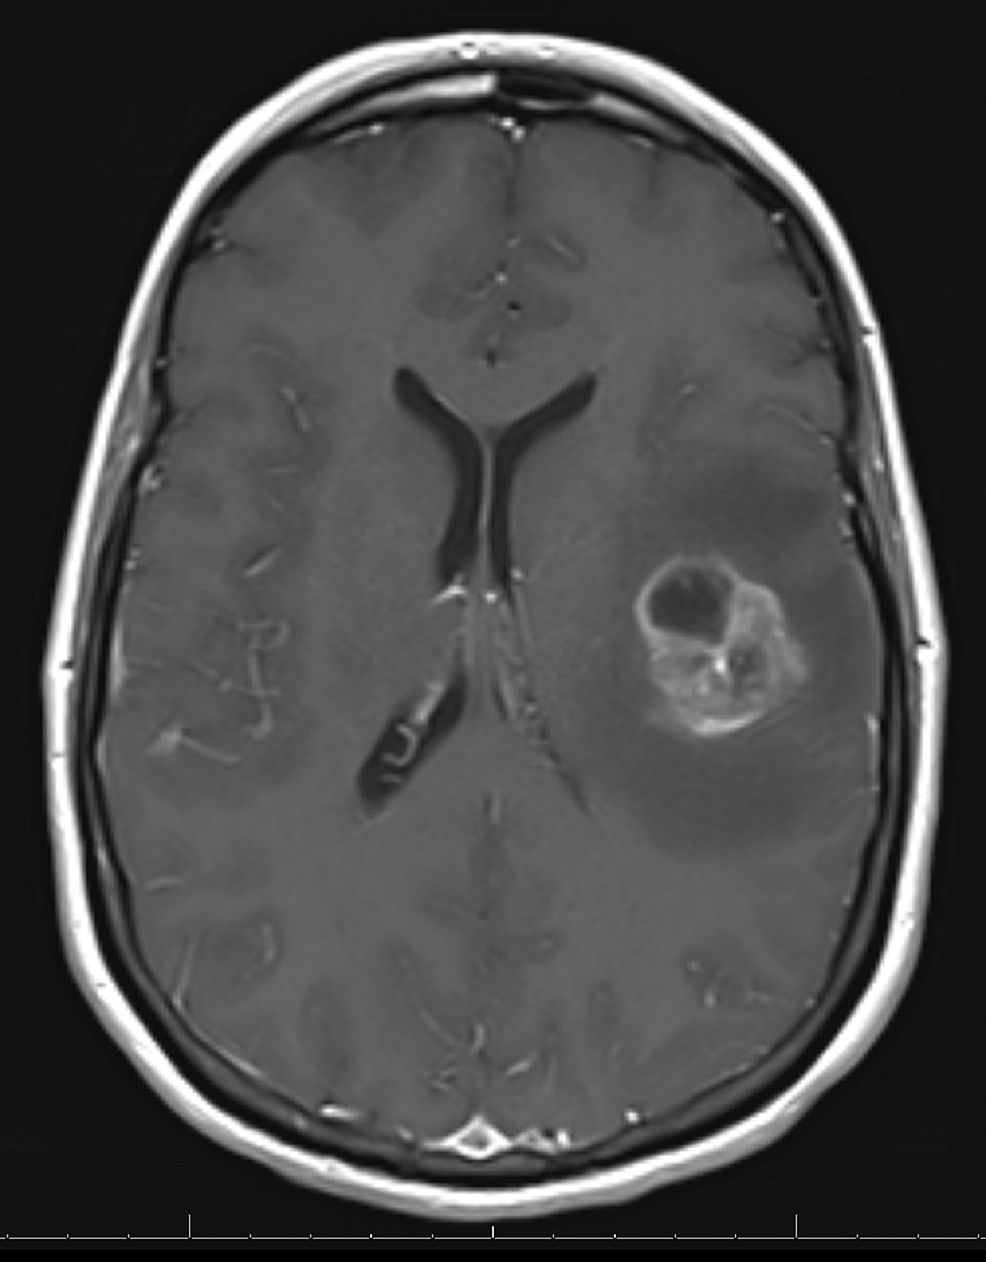 Magnetic-resonance-imaging-(MRI)-showing-solitary-metastasis-in-the-left-frontal-lobe